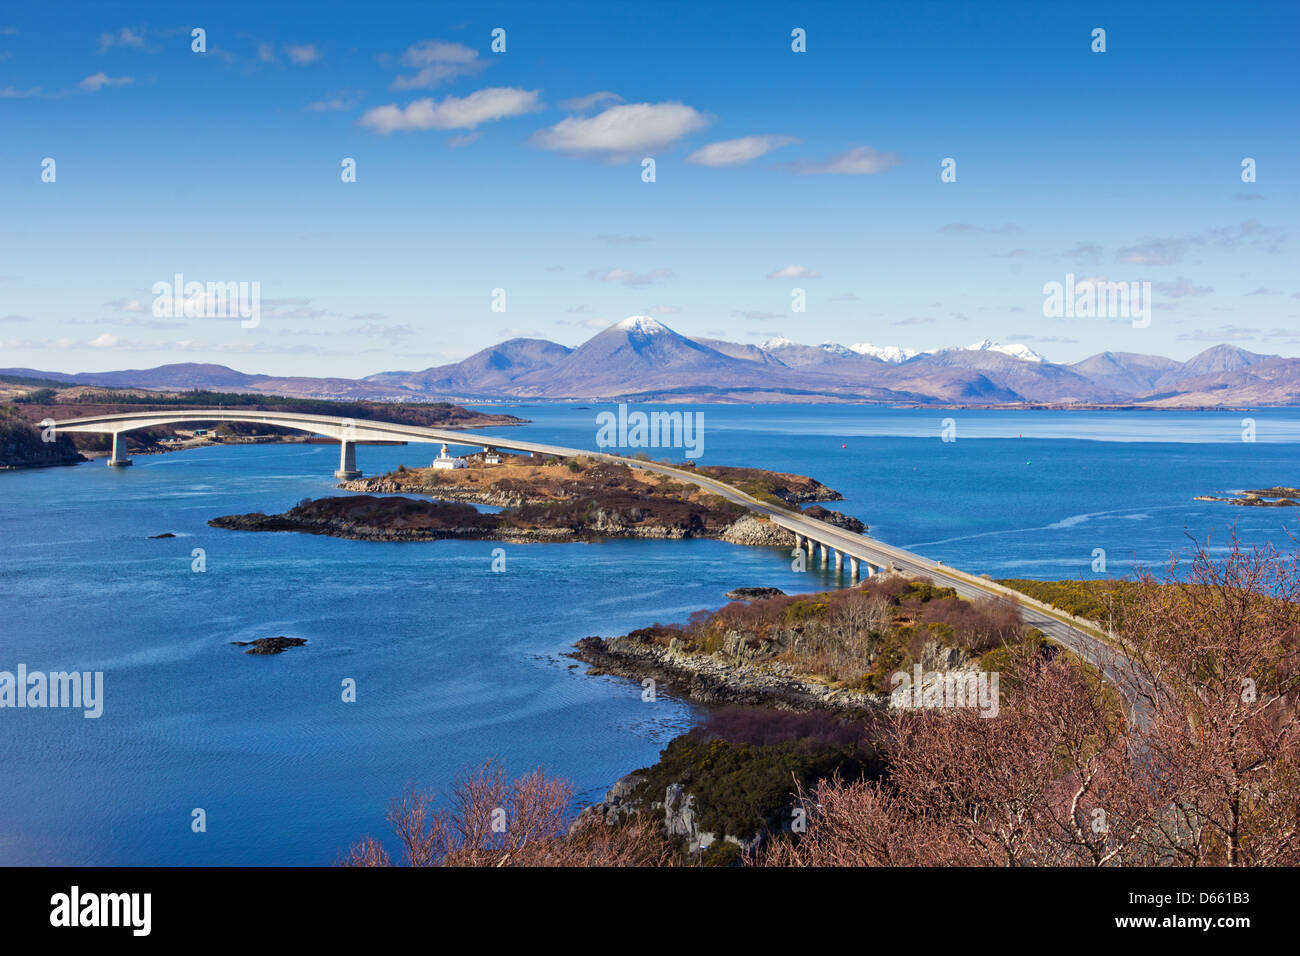 SKYE BRIDGE CROSSING THE KYLE OF LOCH ALSH ON AN EARLY SPRING DAY WITH THE SNOW CAPPED CUILLINS IN THE BACKGROUND Stock Photo